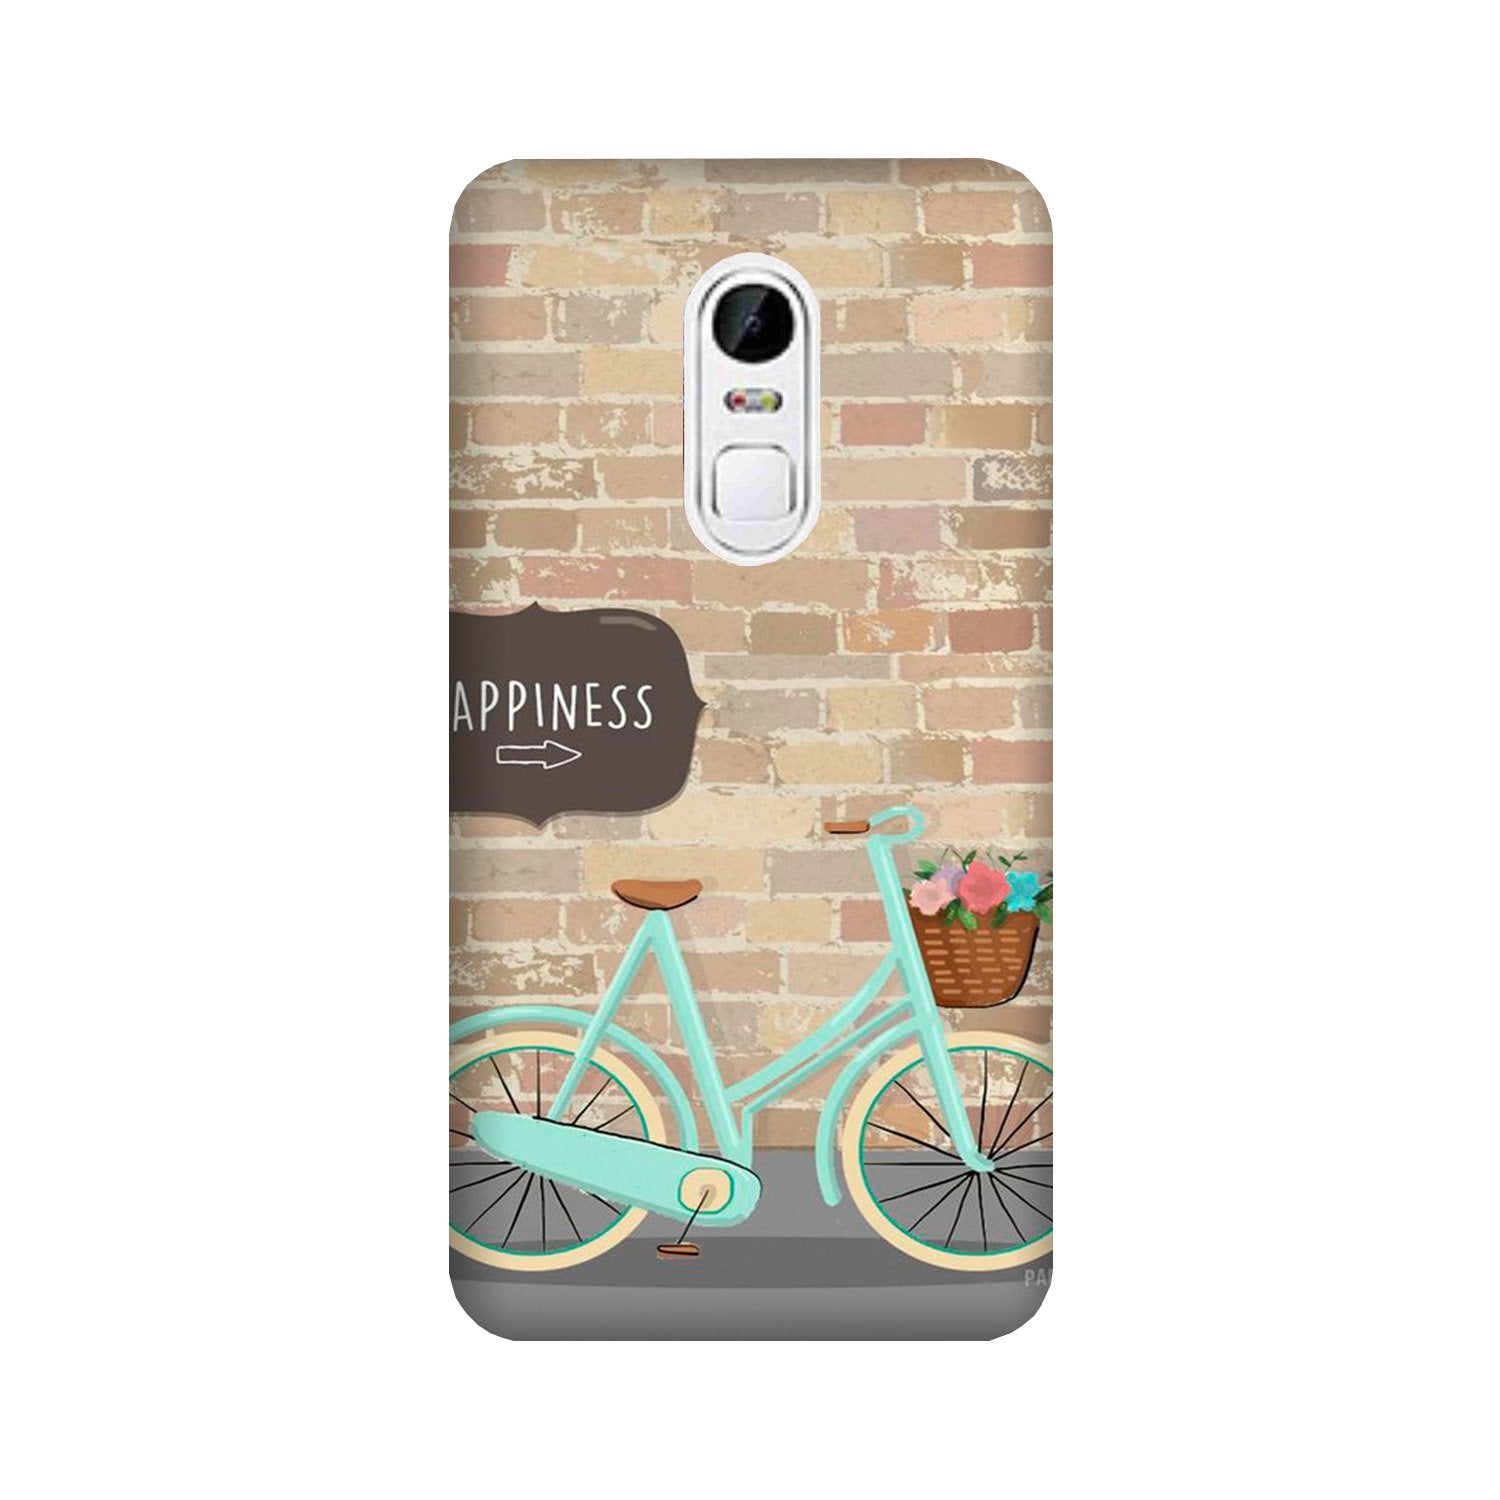 Happiness Case for Lenovo Vibe X3